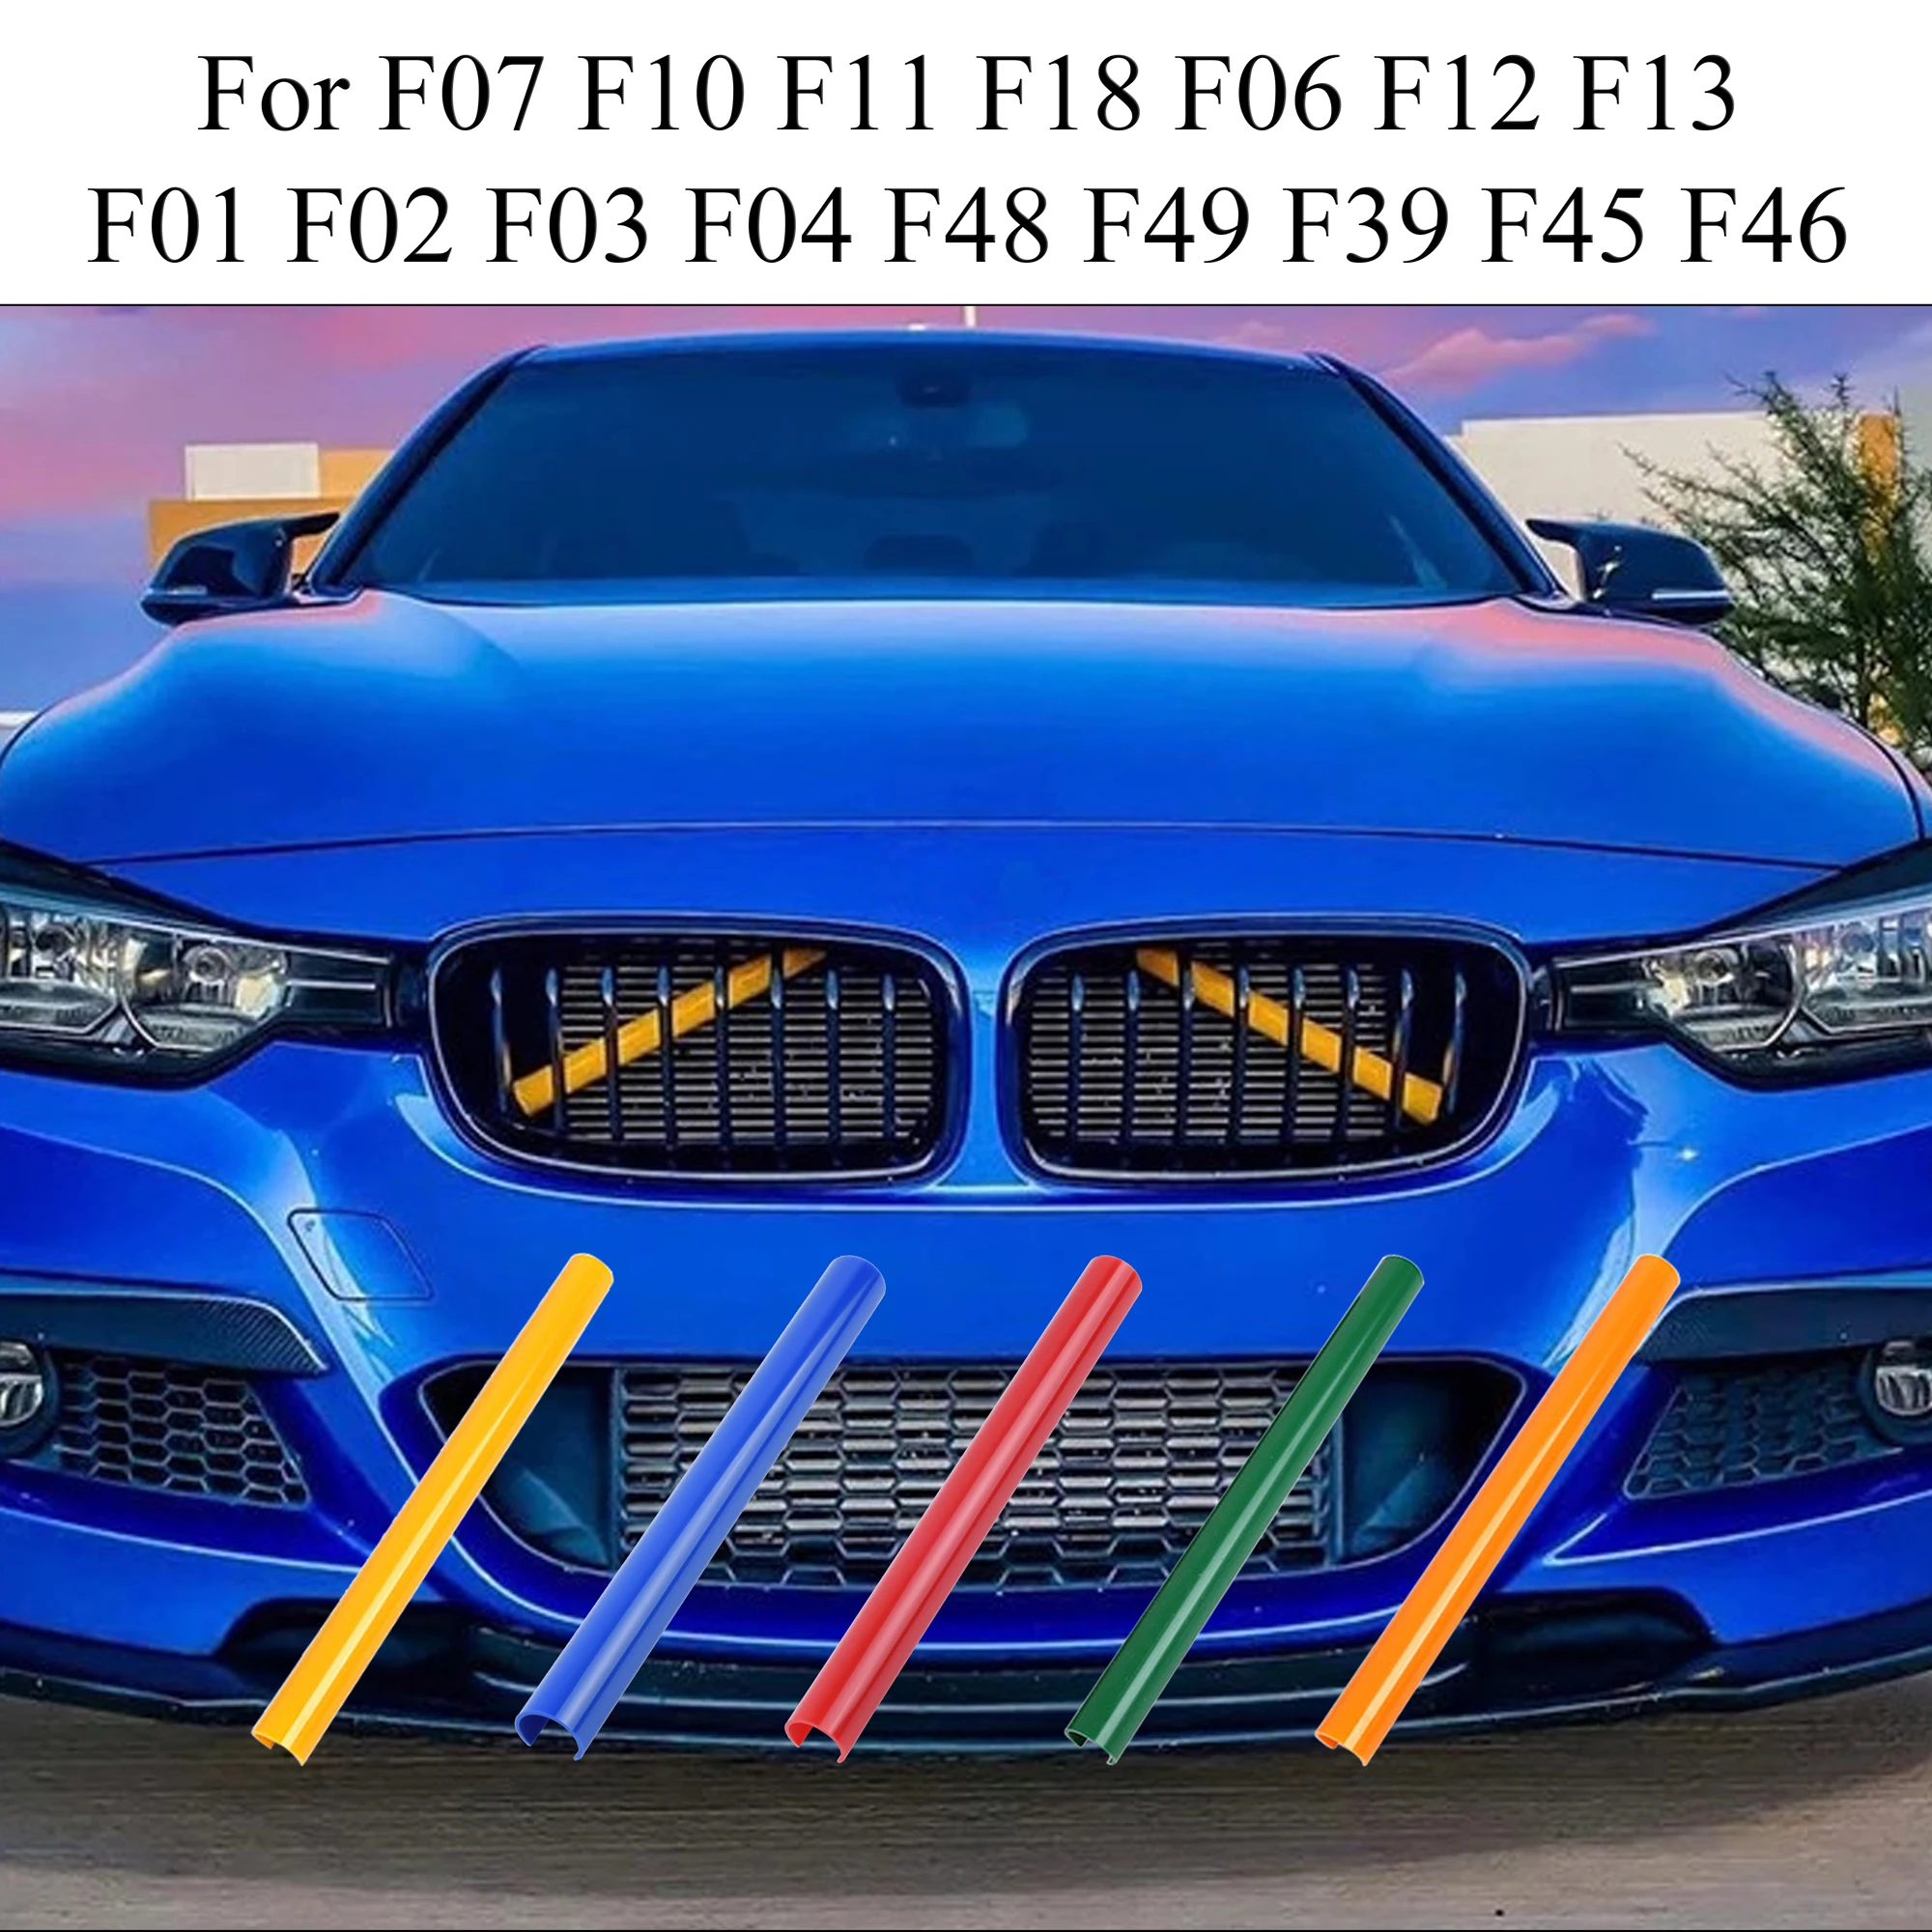 

Car Front Grille Trim Strips For BMW F01 F02 F03 F04 F06 F07 F10 F11 F12 F13 F18 F39 F45 F46 F48 F49 6 Color Decoration